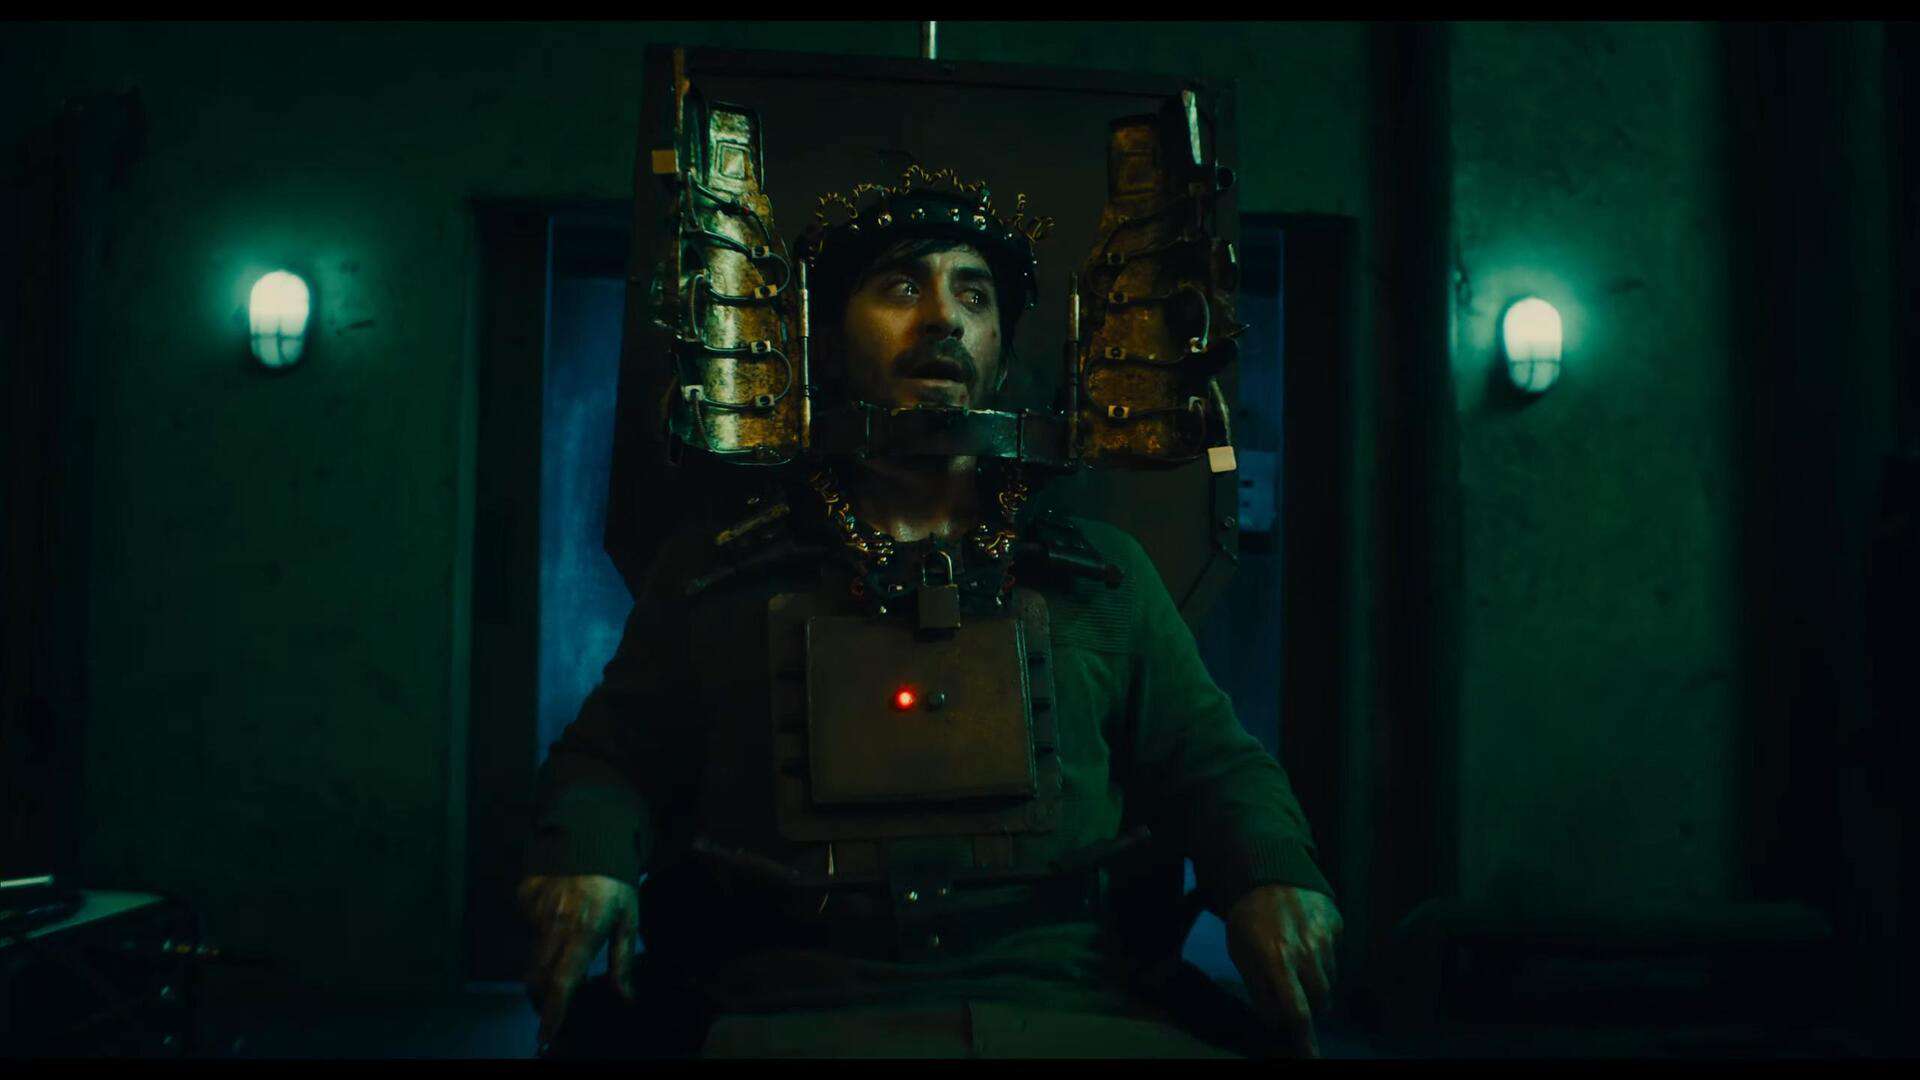 A man is strapped into a torture device in this photo from Twisted Pictures.